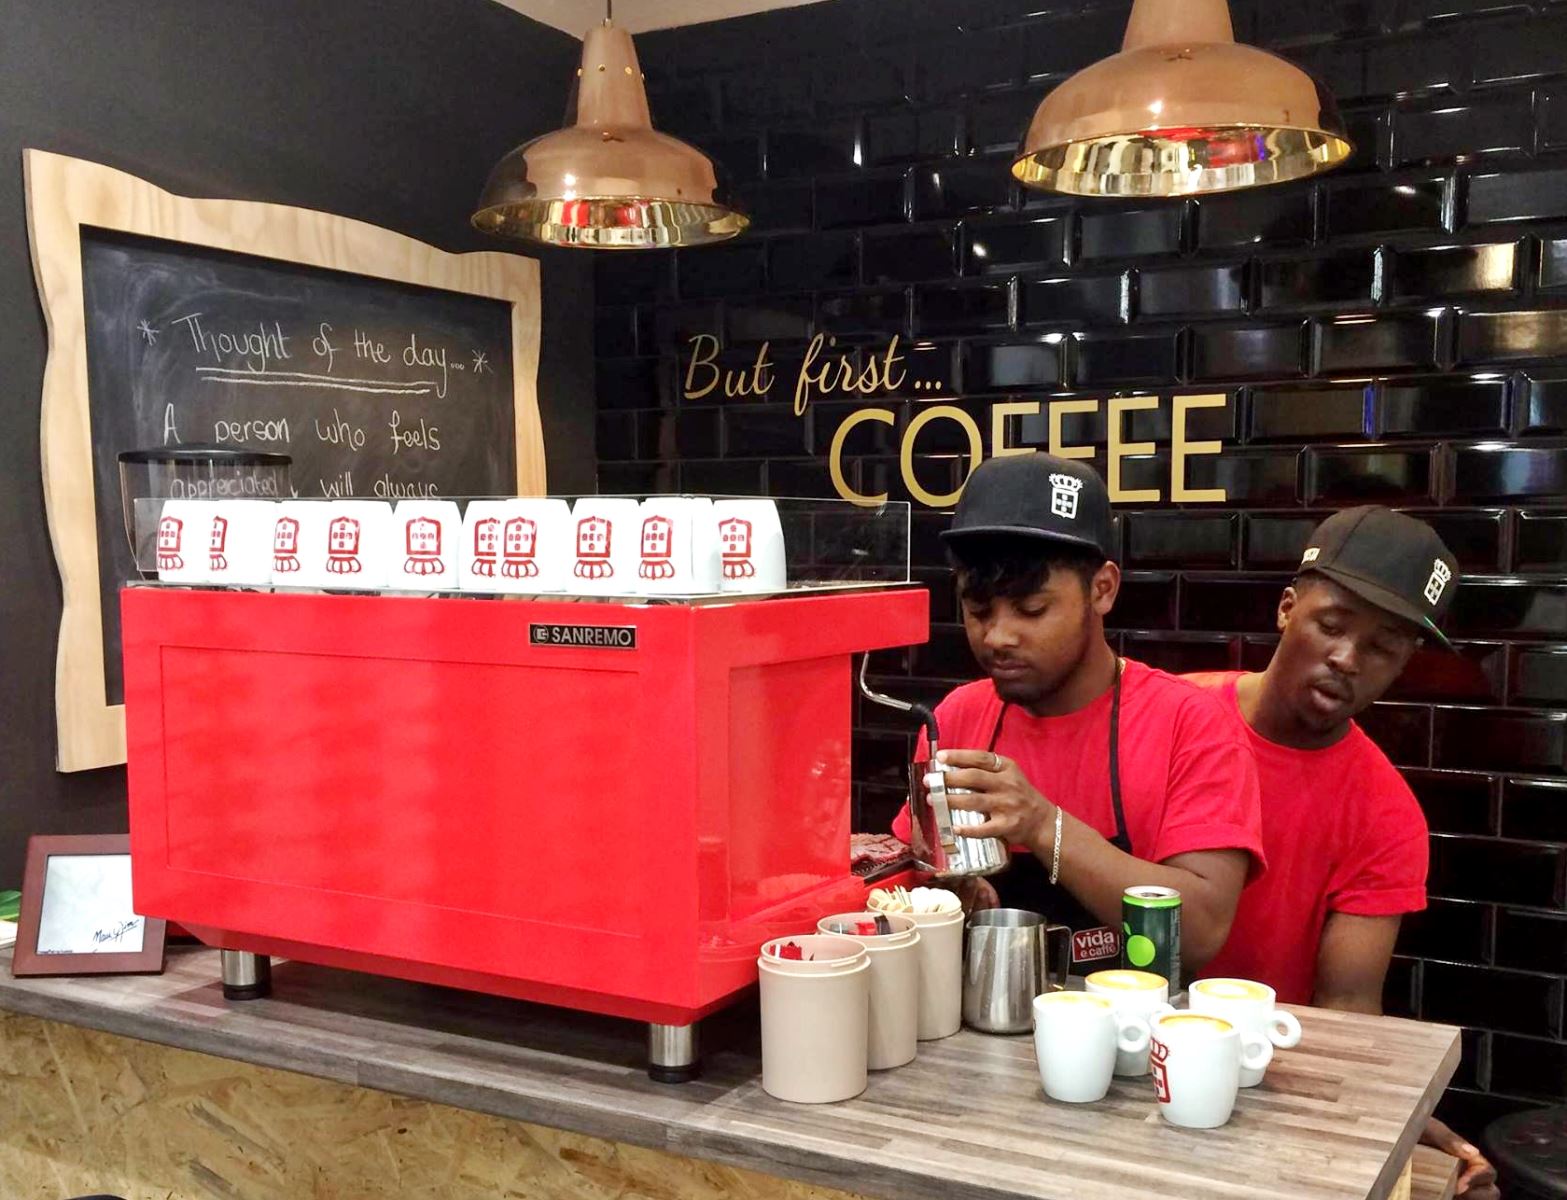 OFFER: Grab a coffee while you wait! We have a Vida e Caffe in-store!